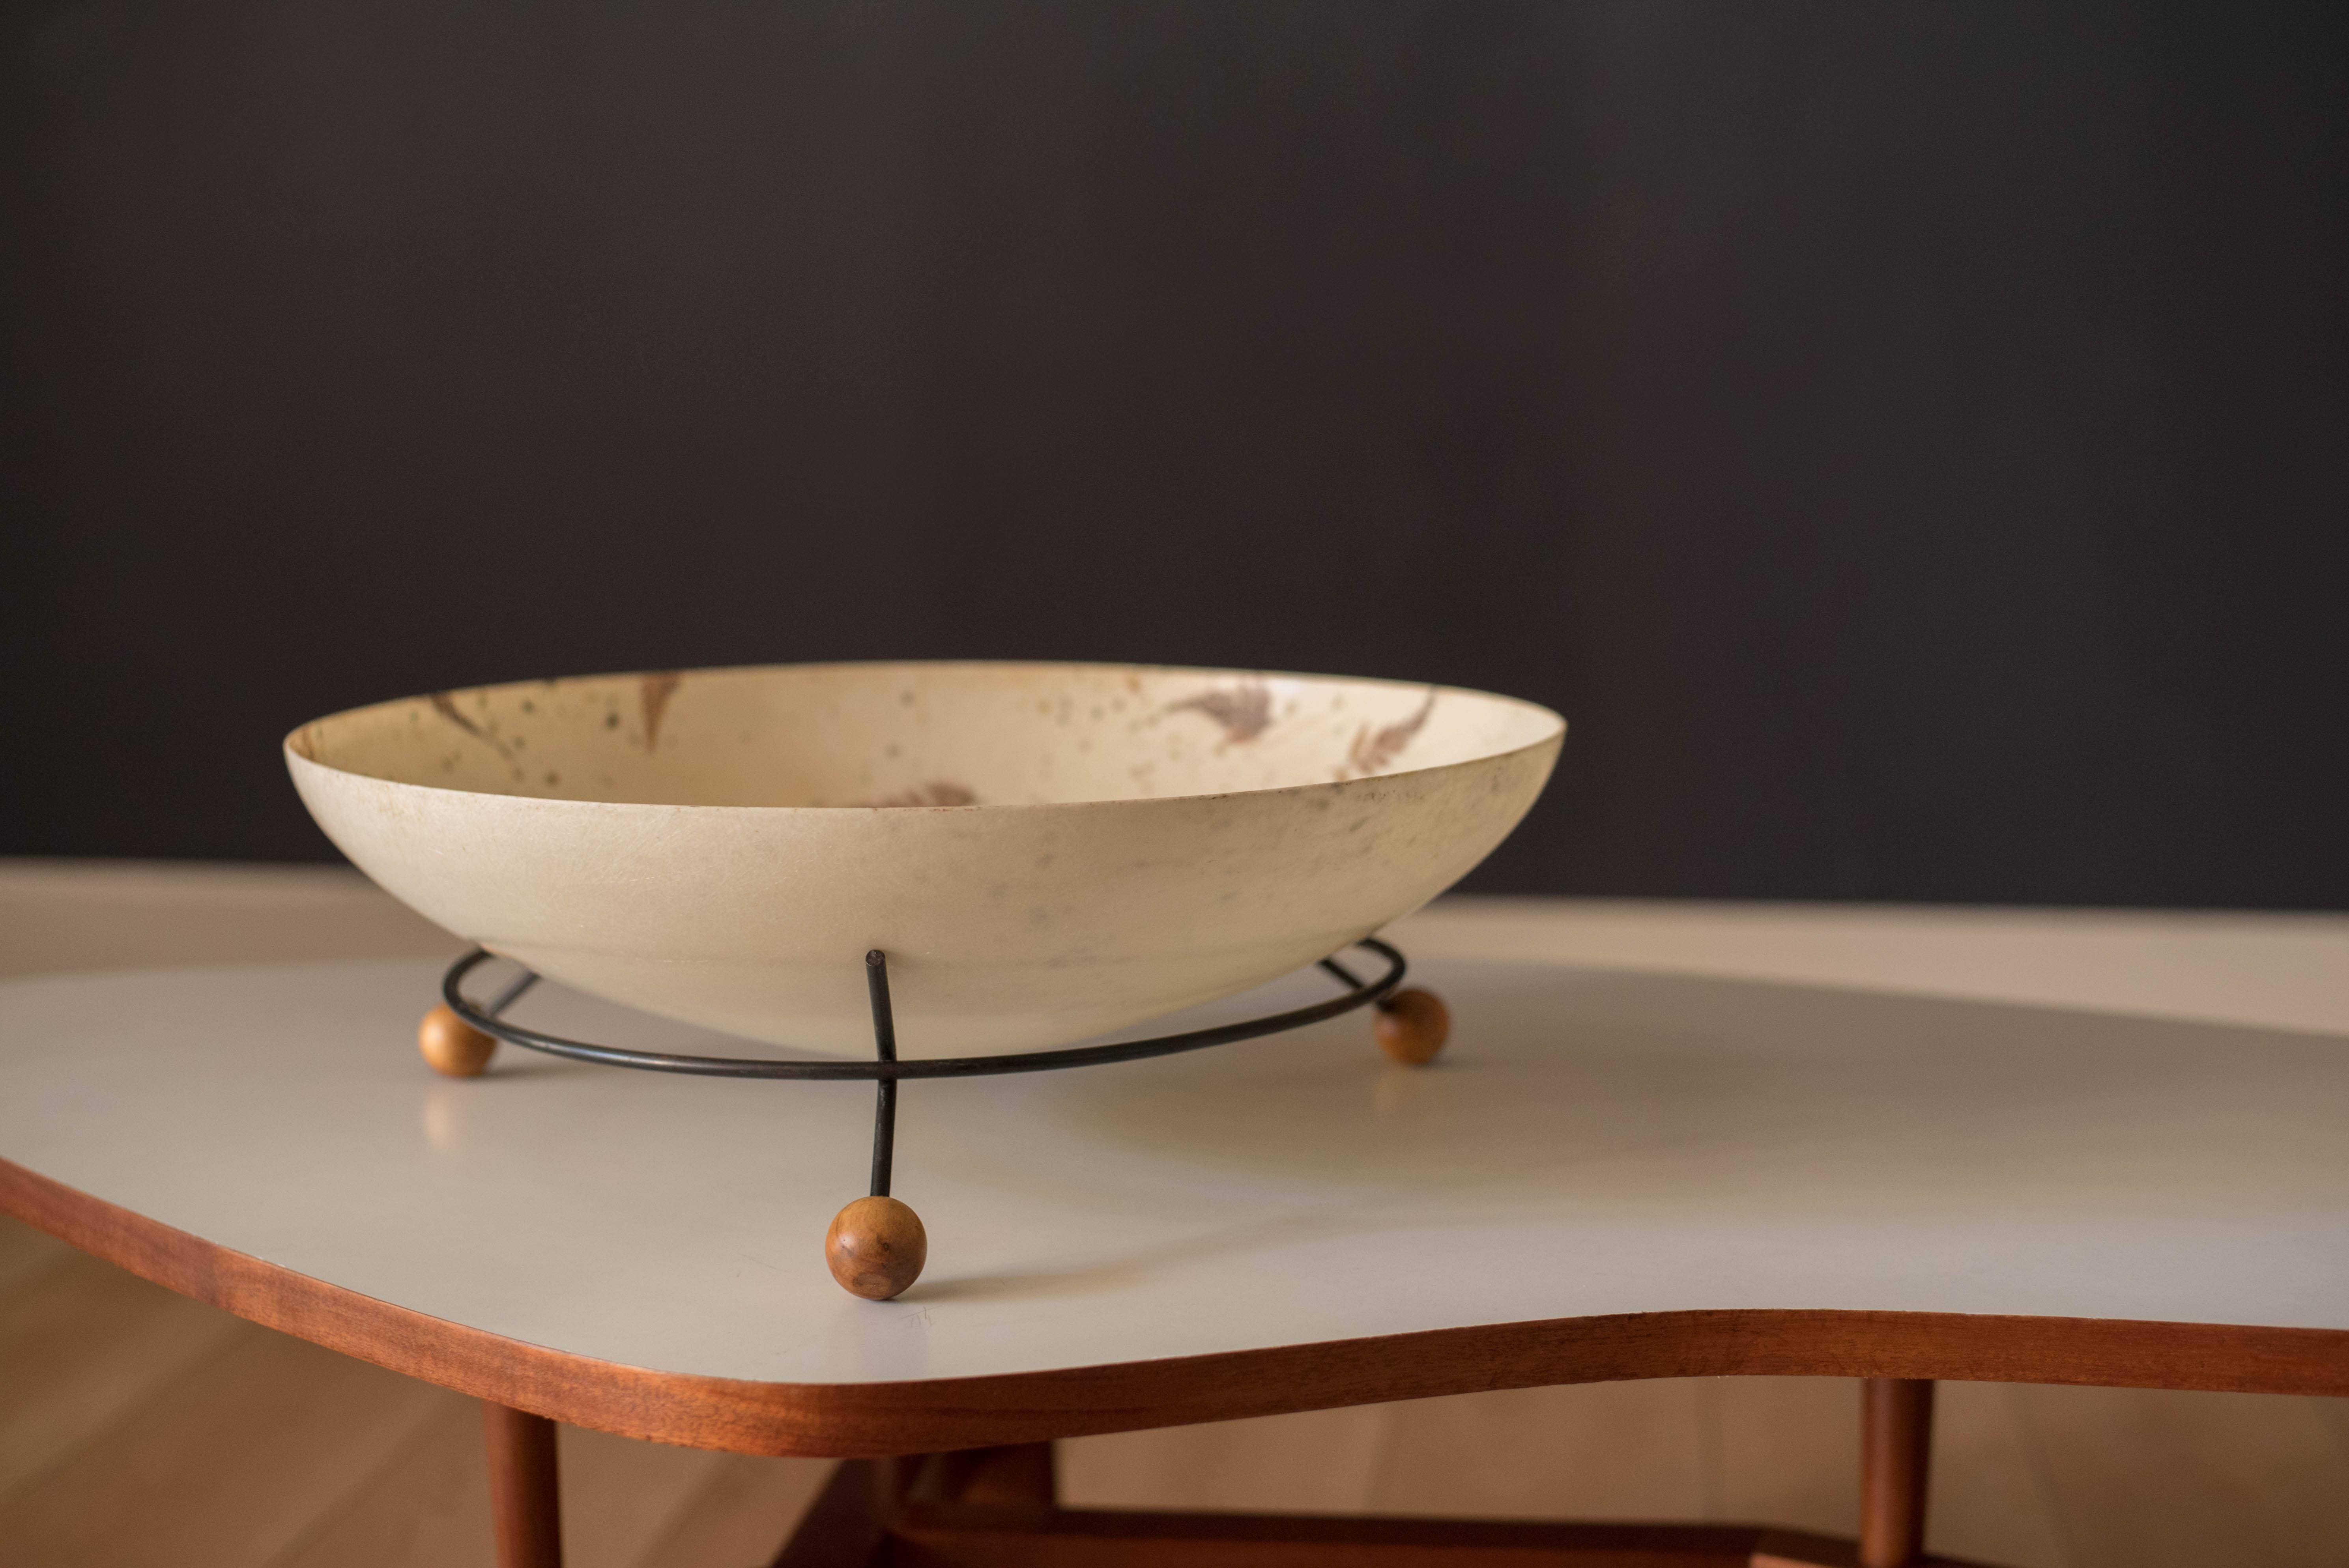 Vintage catchall decorative centerpiece tray, circa 1960s. This versatile display piece is perfect for stashing your belongings and home accessories. Includes a wide fiberglass bowl with a unique interior leaf inlay. Features a supporting iron ring